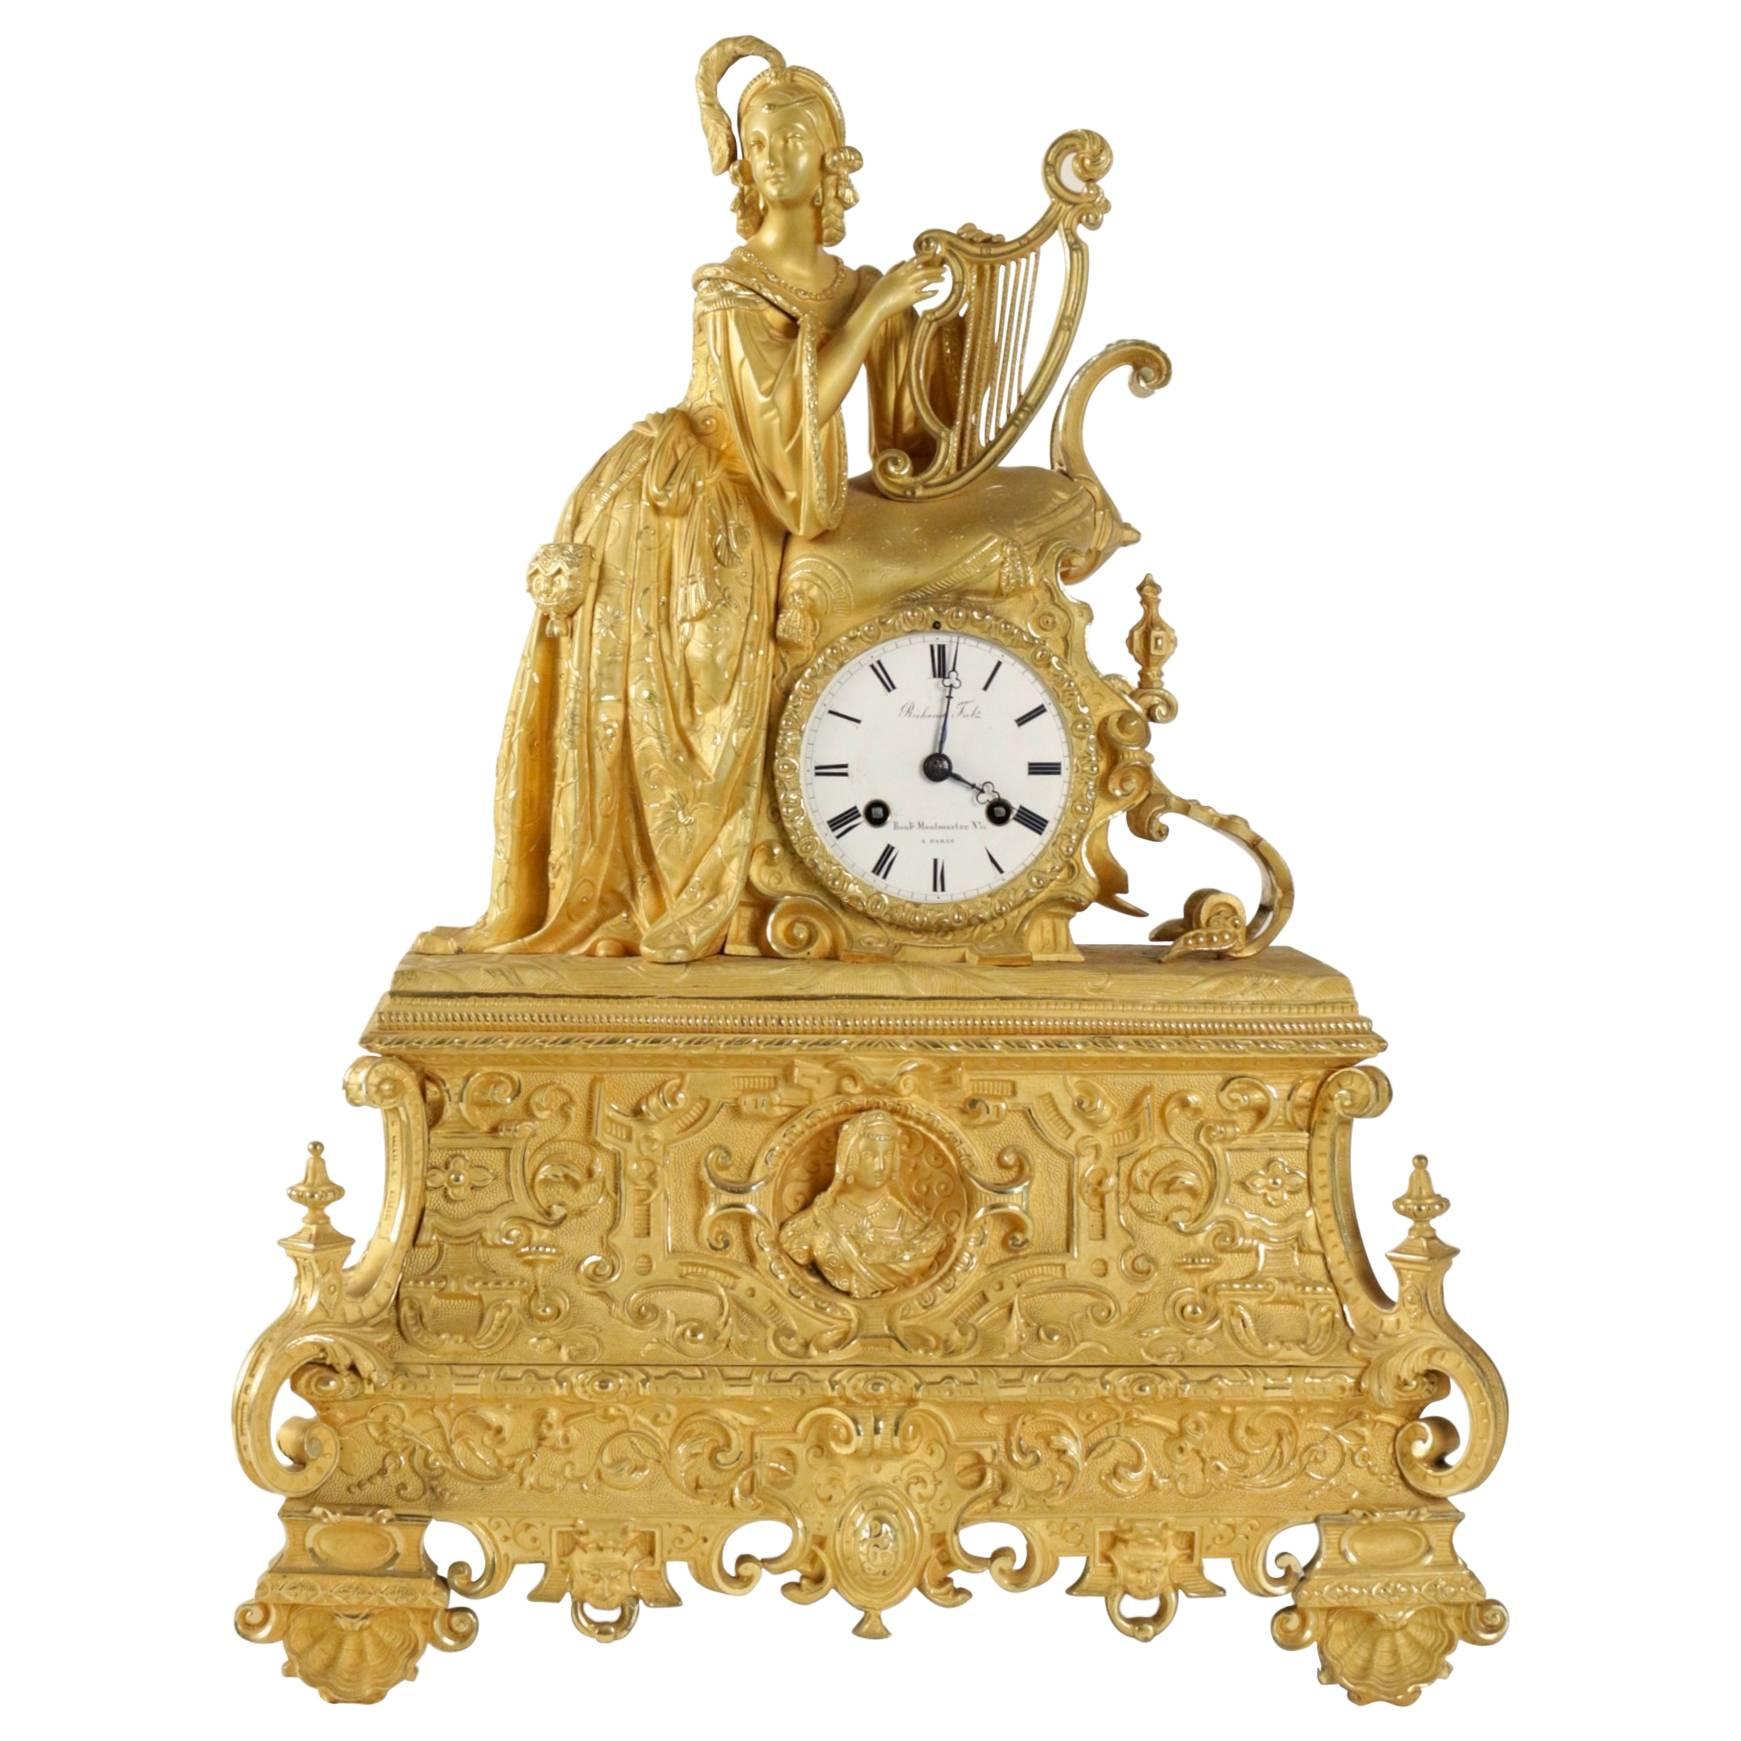 Richly Decorate Romantic Gilt and Chiseled Bronze Mantle Clock, circa 1830